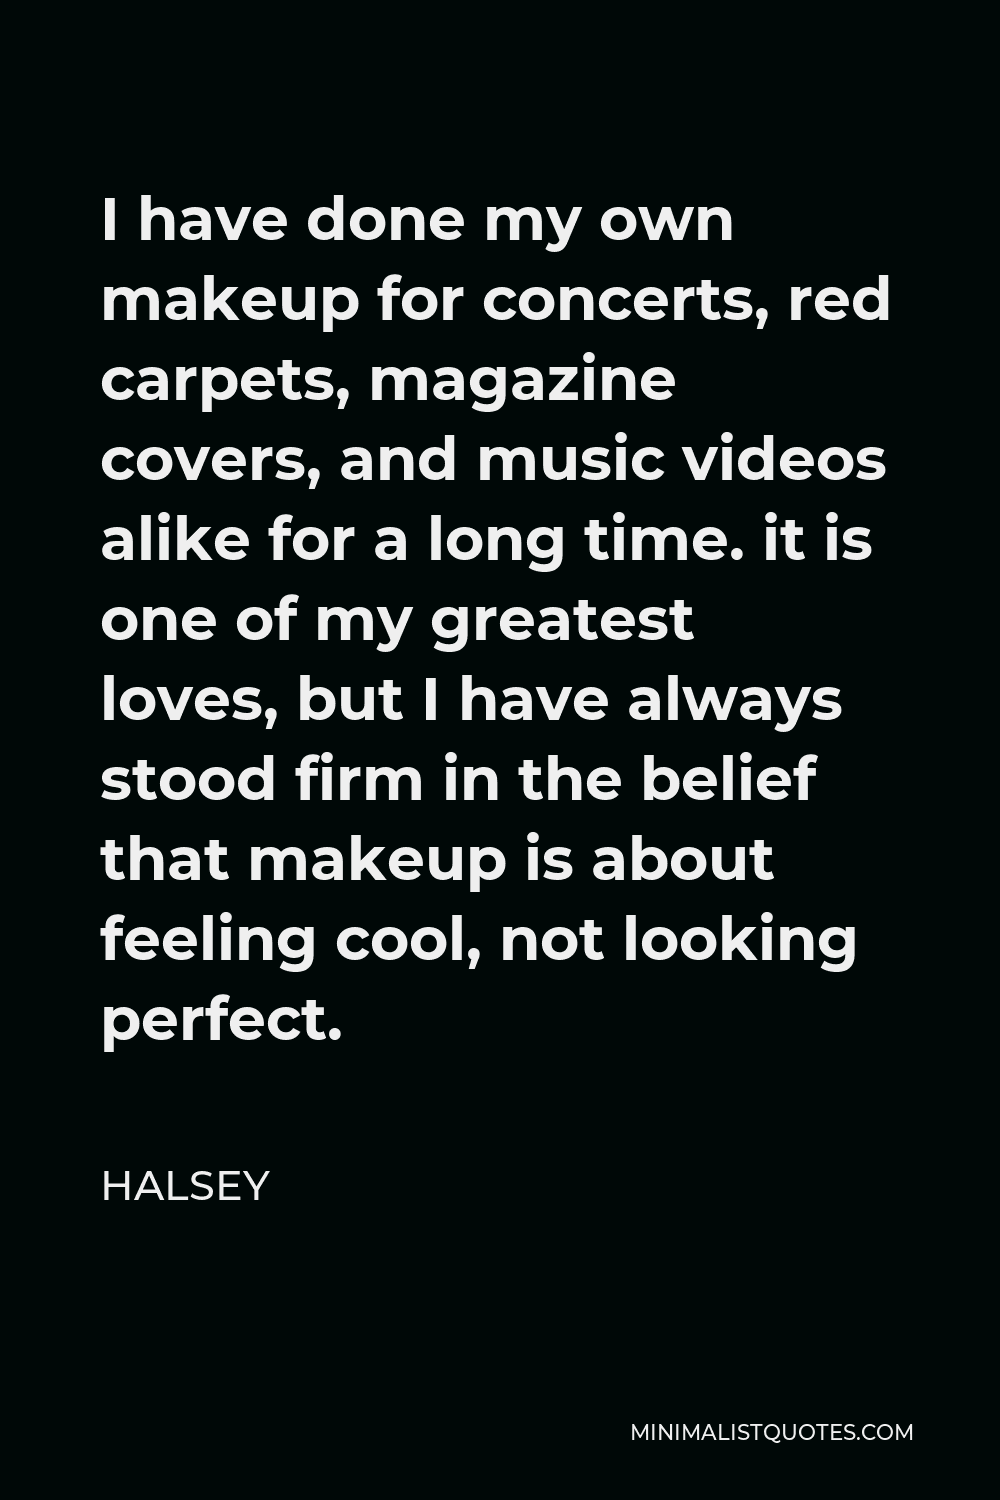 Halsey Quote - I have done my own makeup for concerts, red carpets, magazine covers, and music videos alike for a long time. it is one of my greatest loves, but I have always stood firm in the belief that makeup is about feeling cool, not looking perfect.